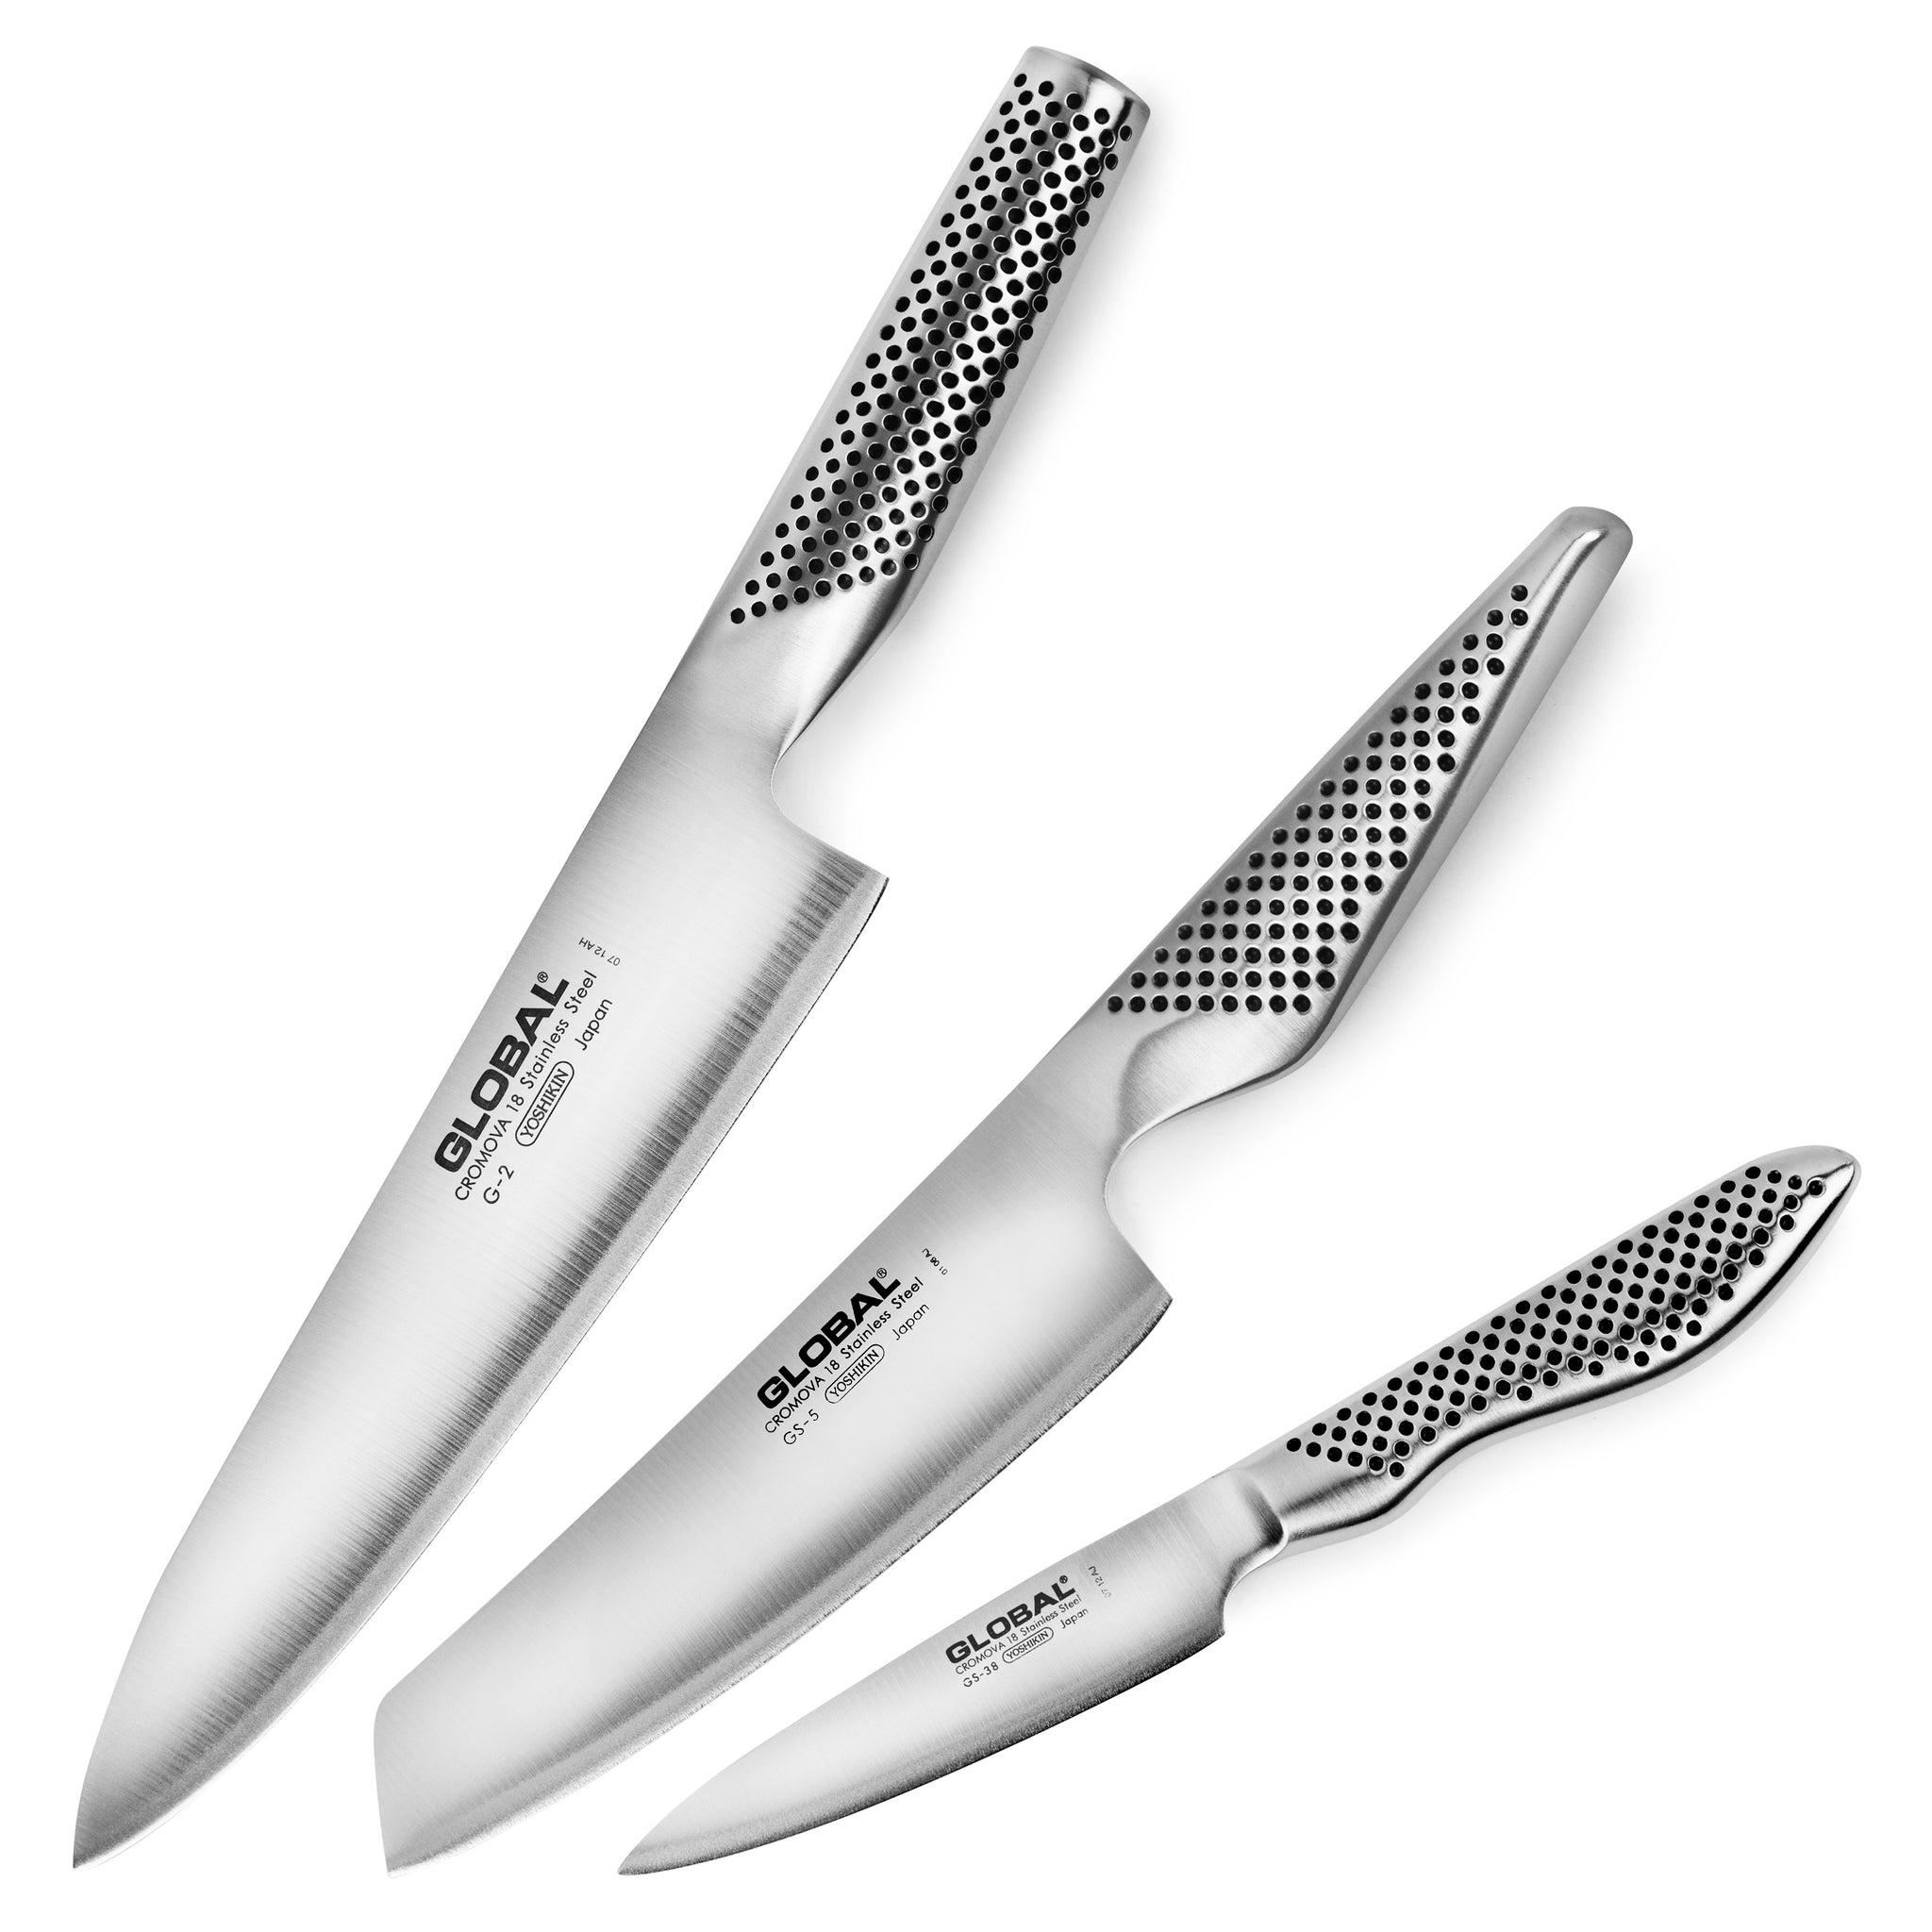 Global Knife Sets – Cutlery and More